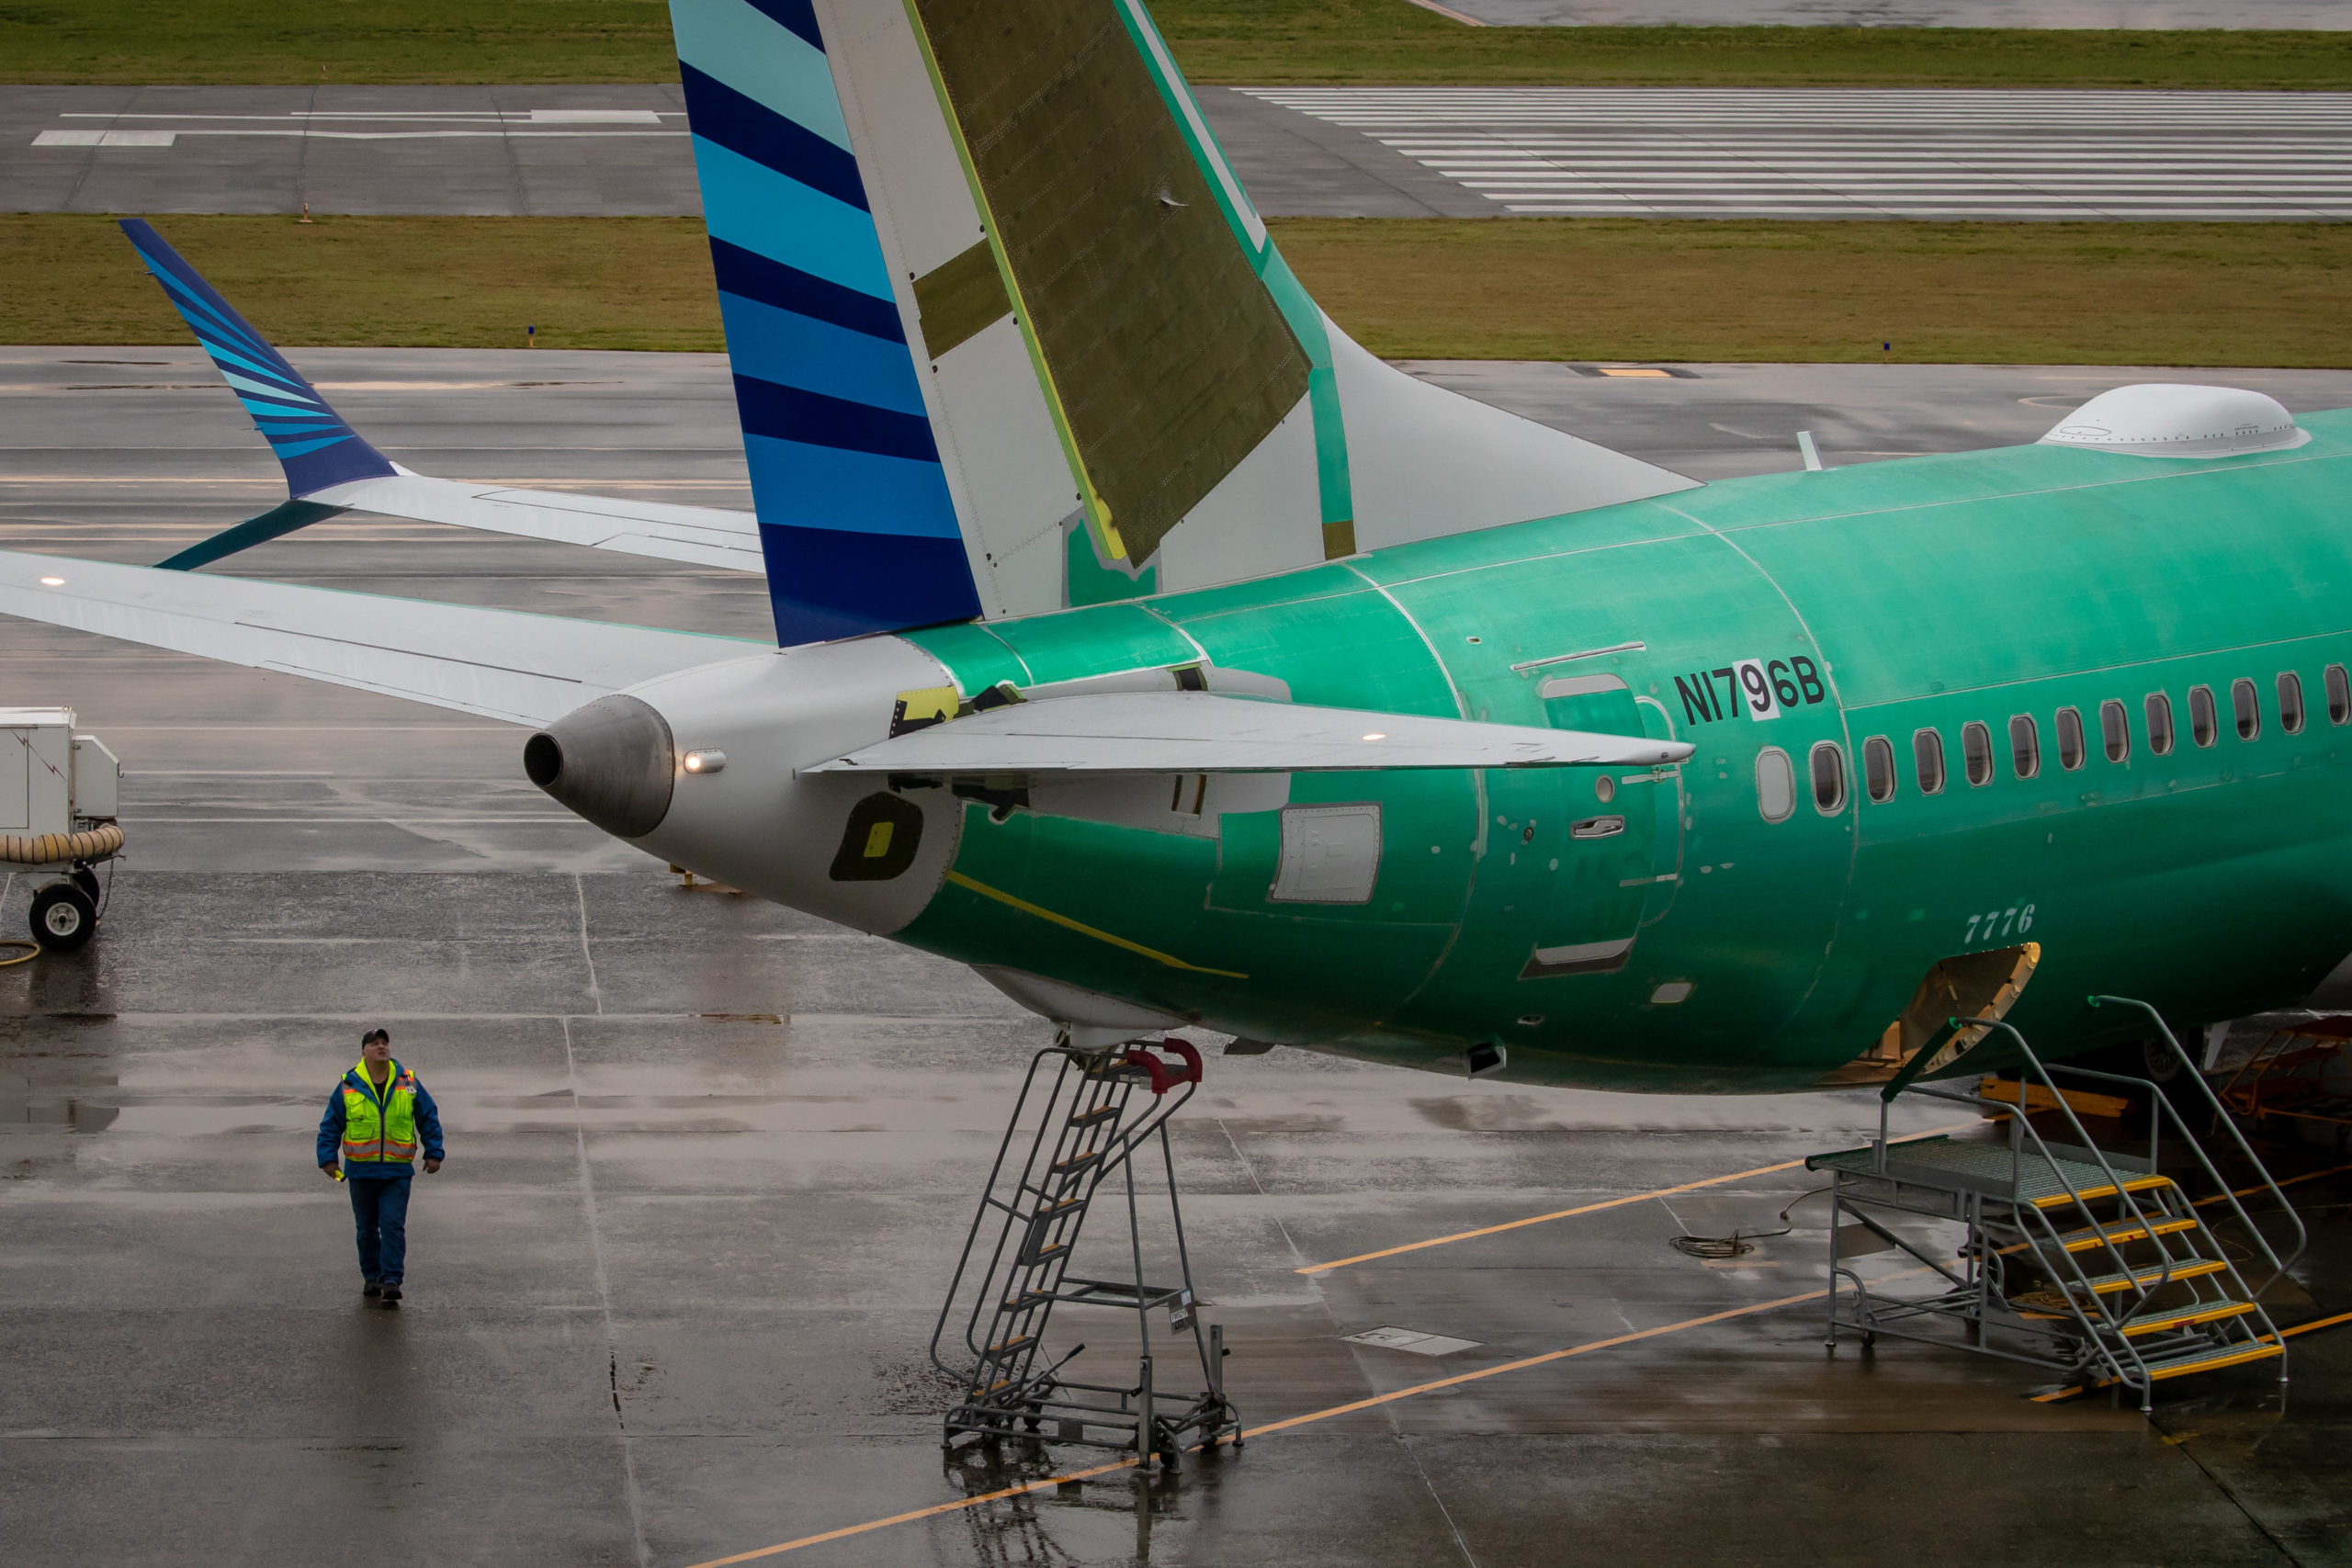 Boeing reassigns hundreds of 737 Max employees whereas provider Spirit mulls layoffs